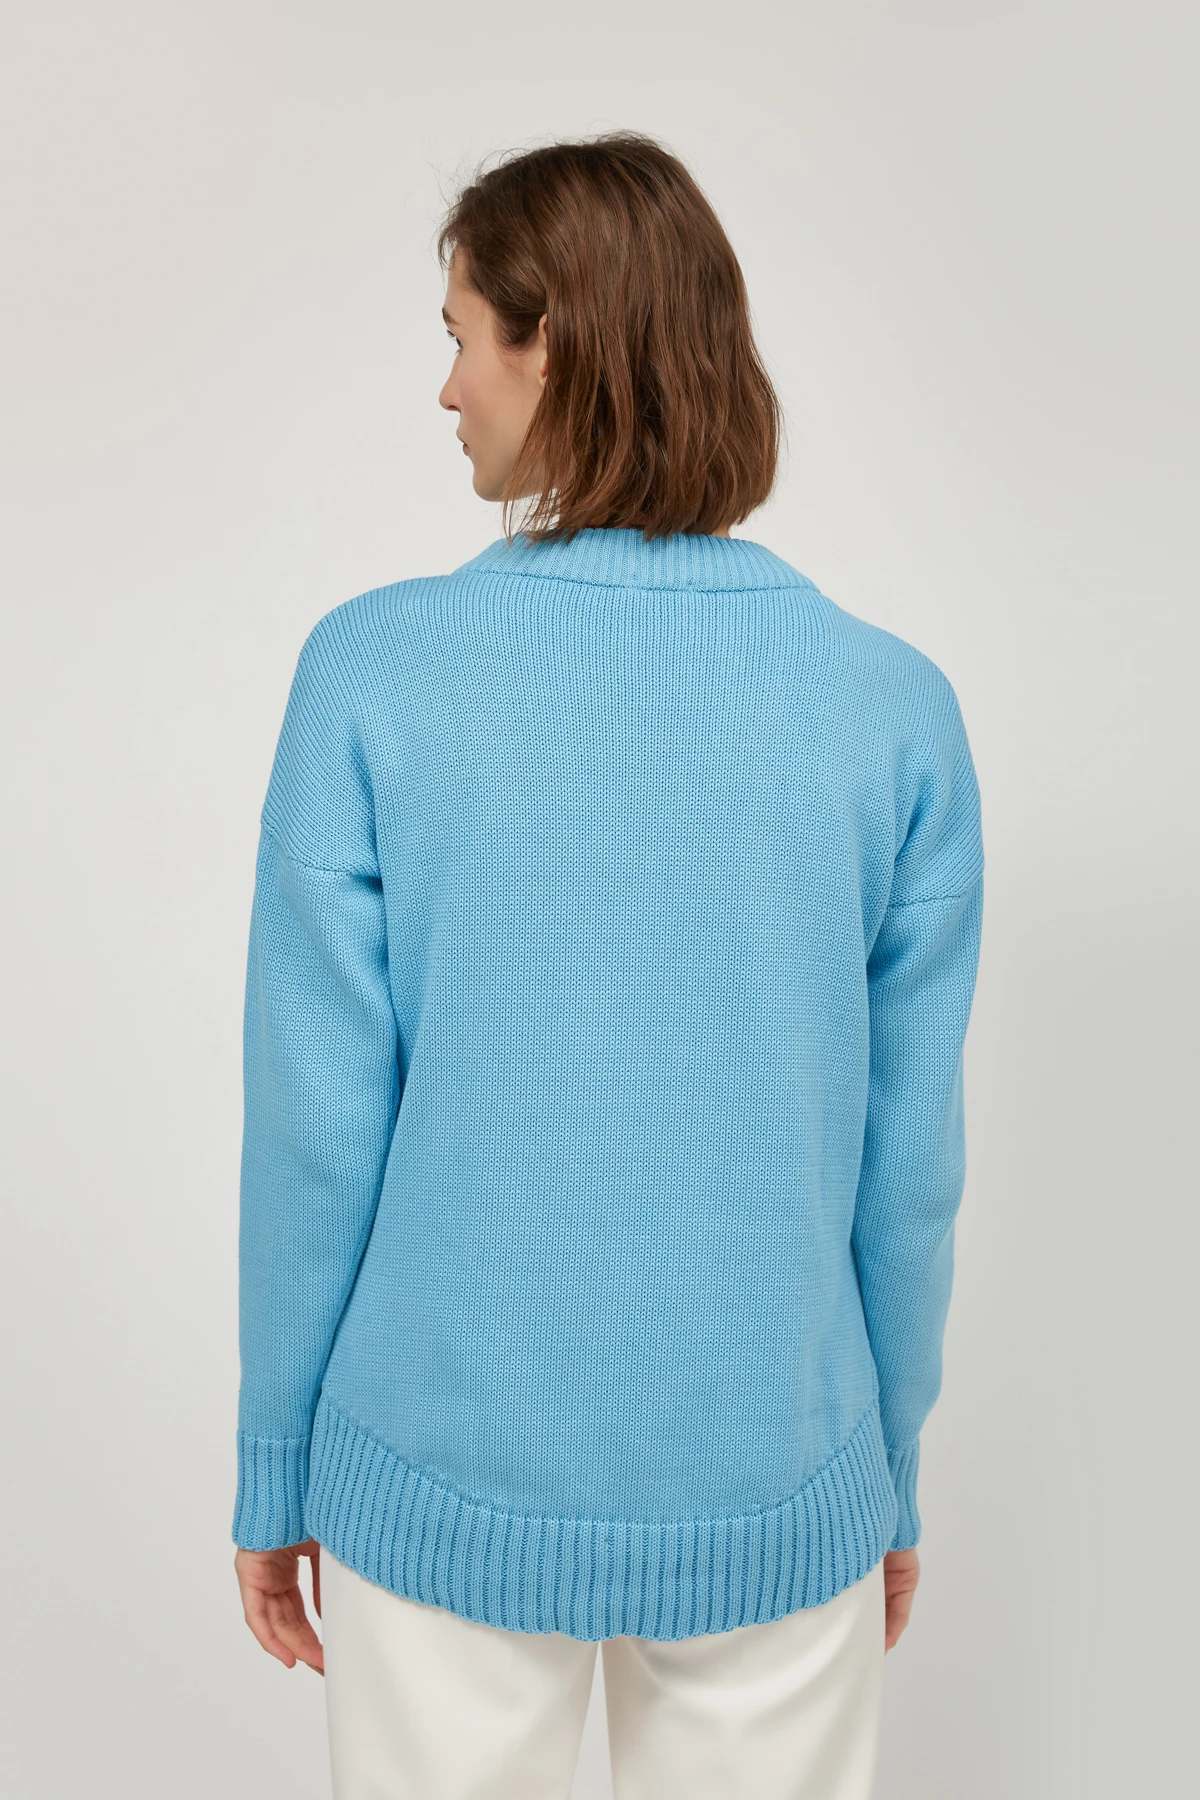 Blue knitted cotton sweater, photo 5